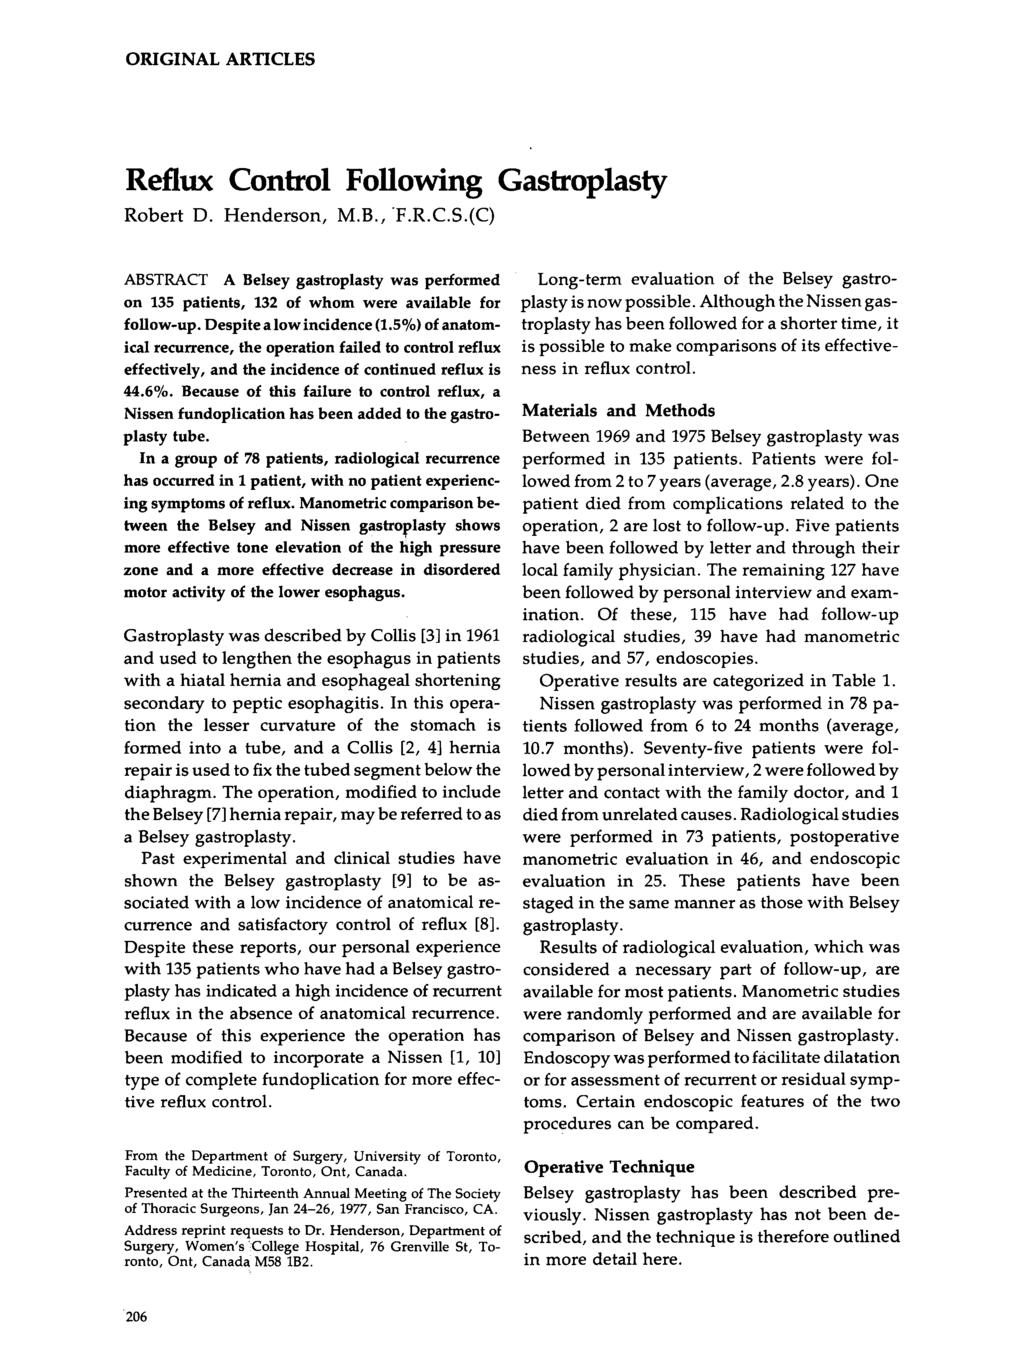 ORIGINAL ARTICLES Reflux Control Following Gastroplasty Robert D. Henderson, M.B.,.F.R.C.S.(C) ABSTRACT A Belsey gastroplasty was performed on 135 patients, 132 of whom were available for follow-up.